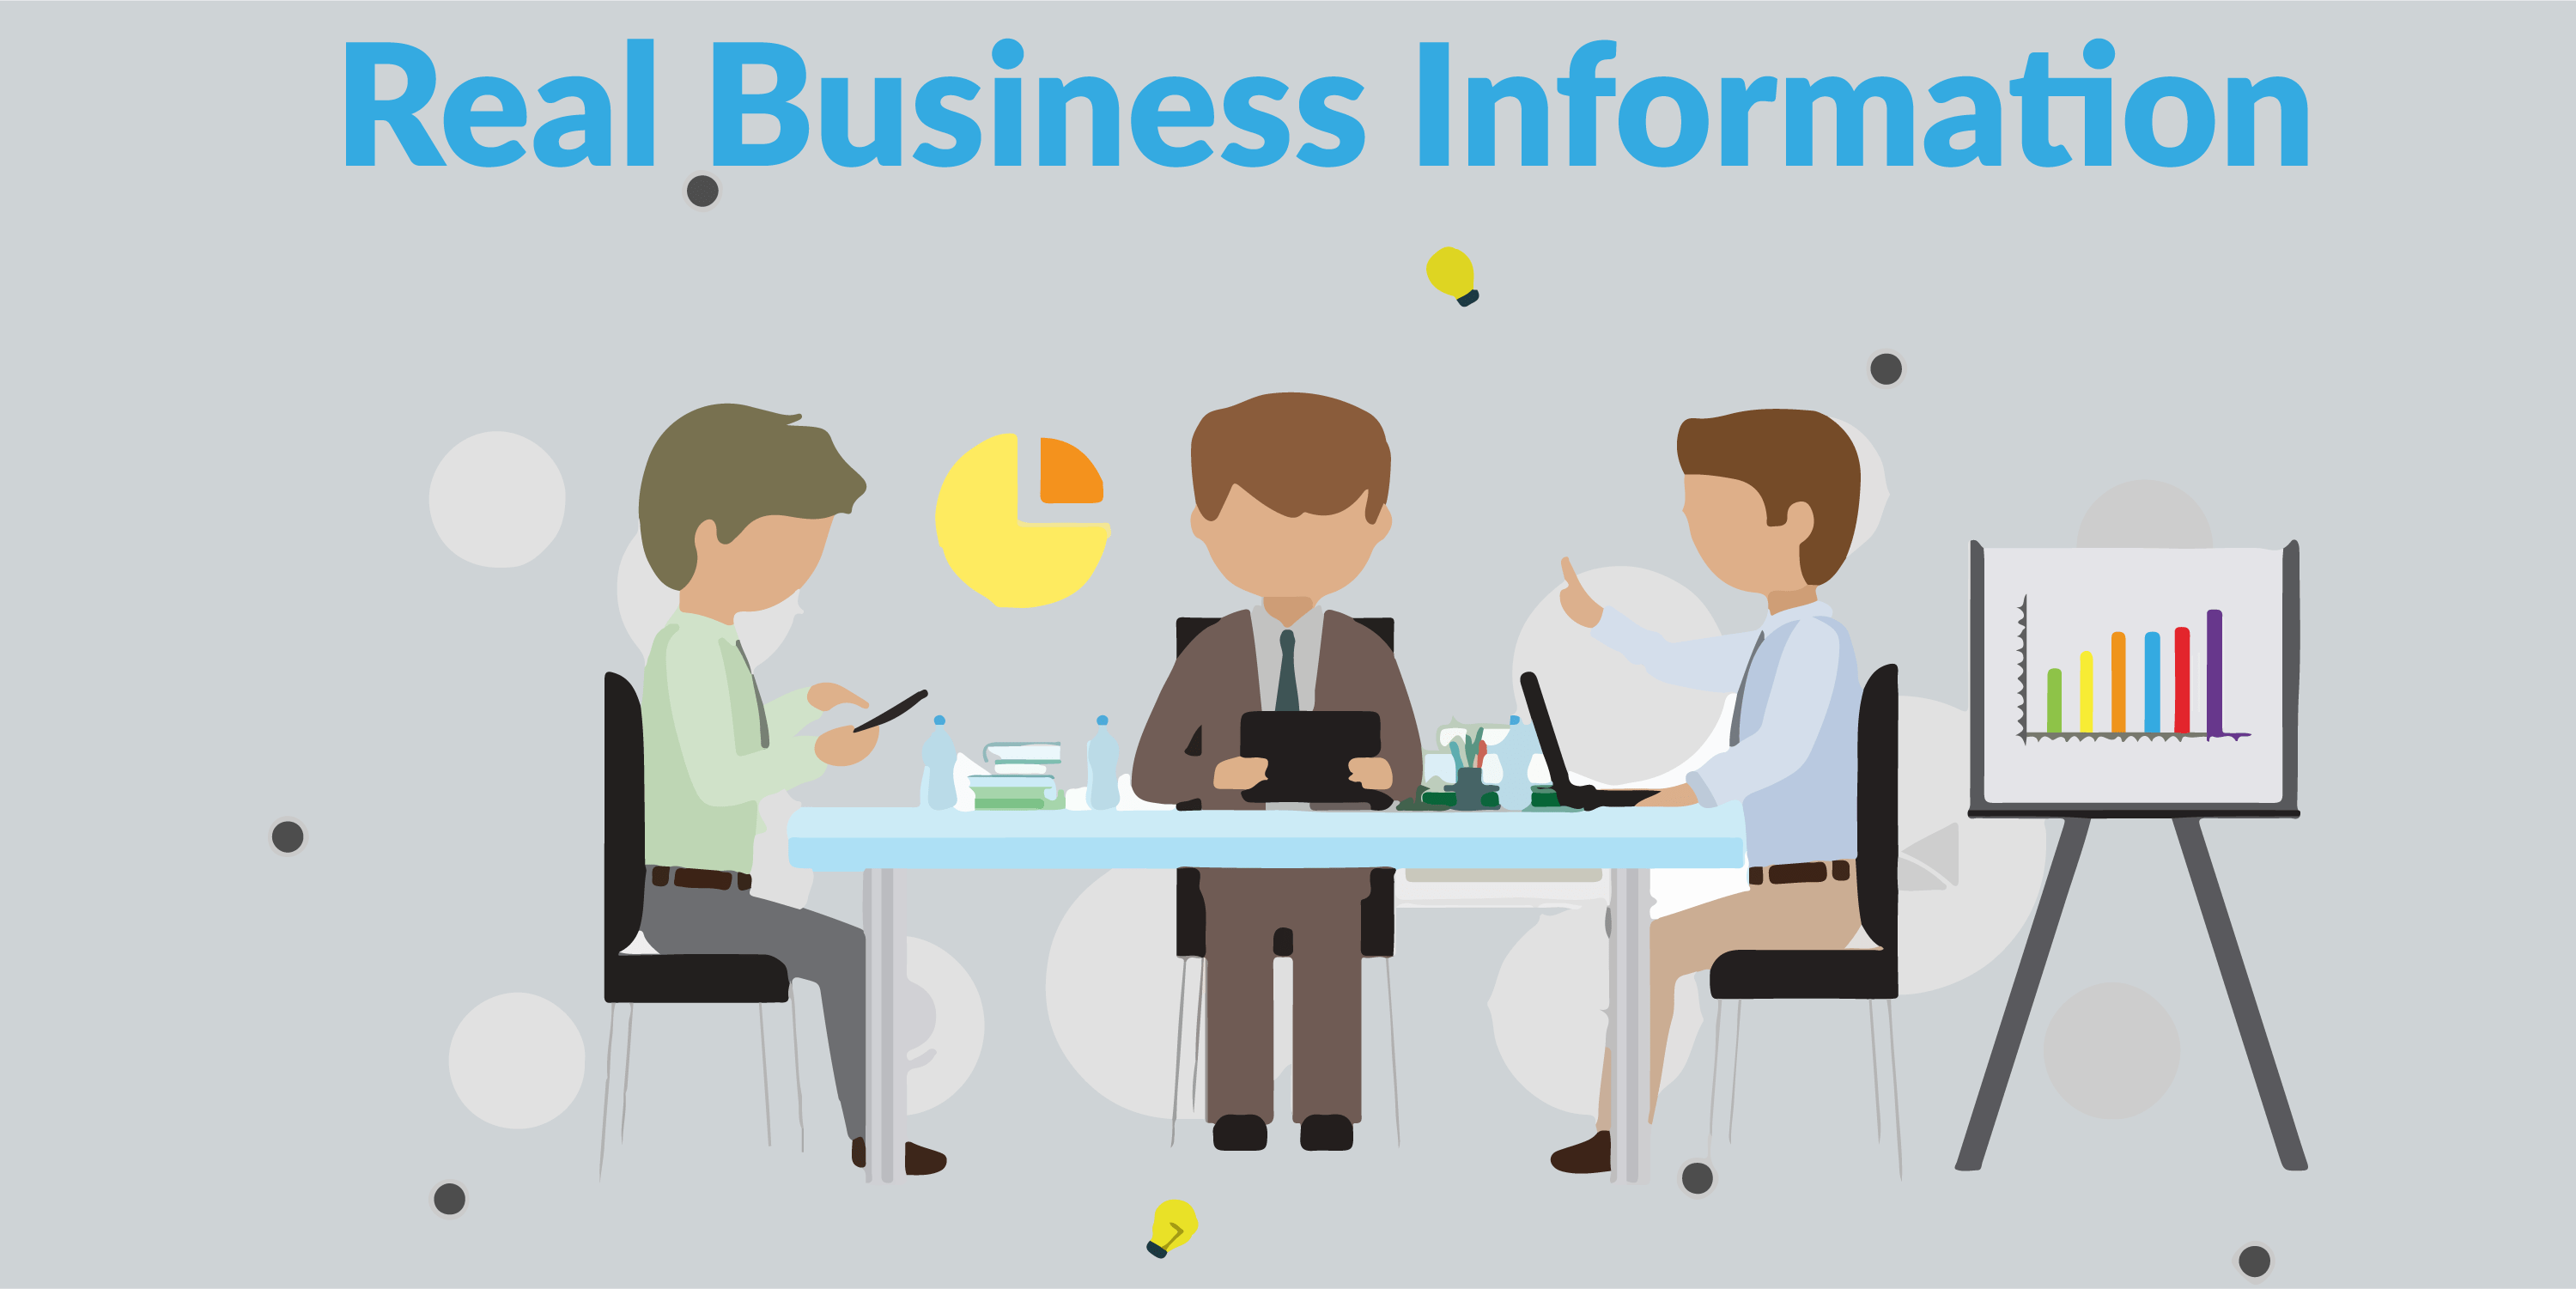 REAL BUSINESS INFORMATION